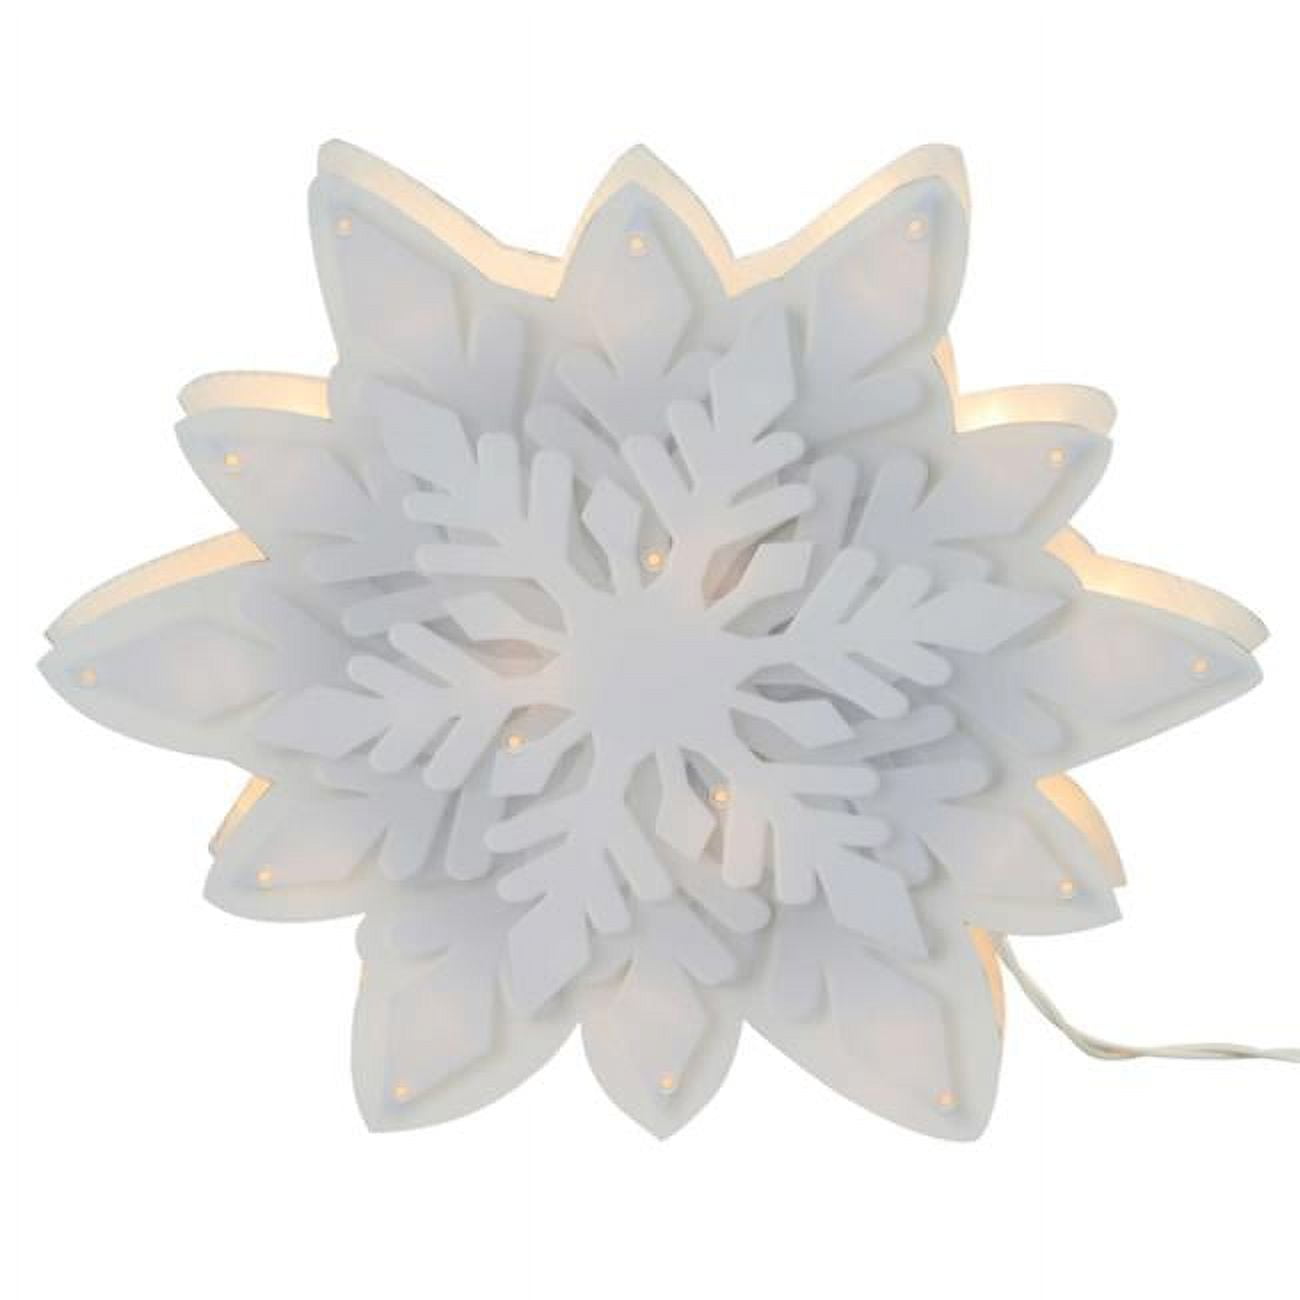 Picture of ACE Trading 9070776 Snowflake Window Decor